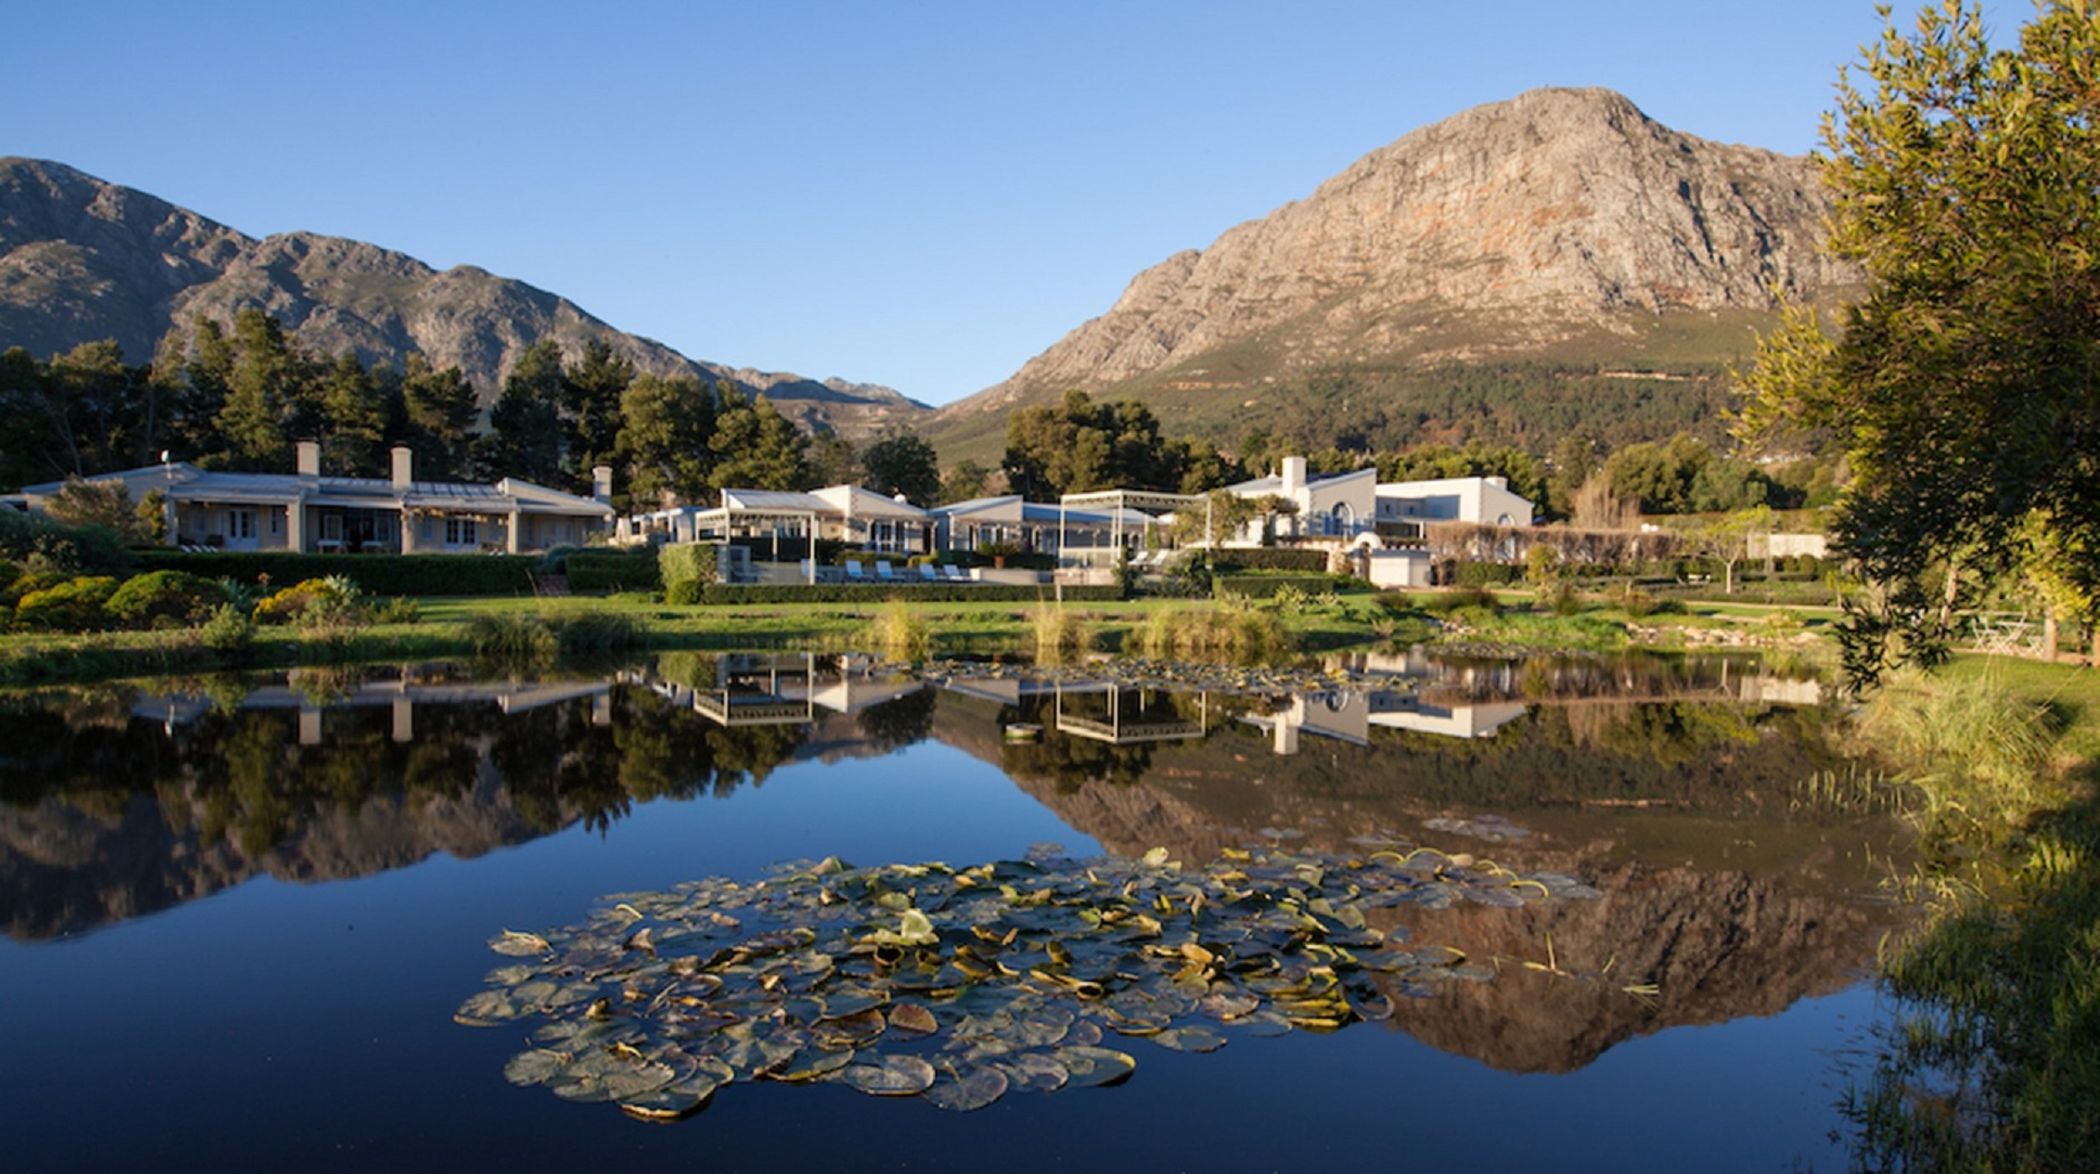 13 guest room guesthouse for sale in Franschhoek